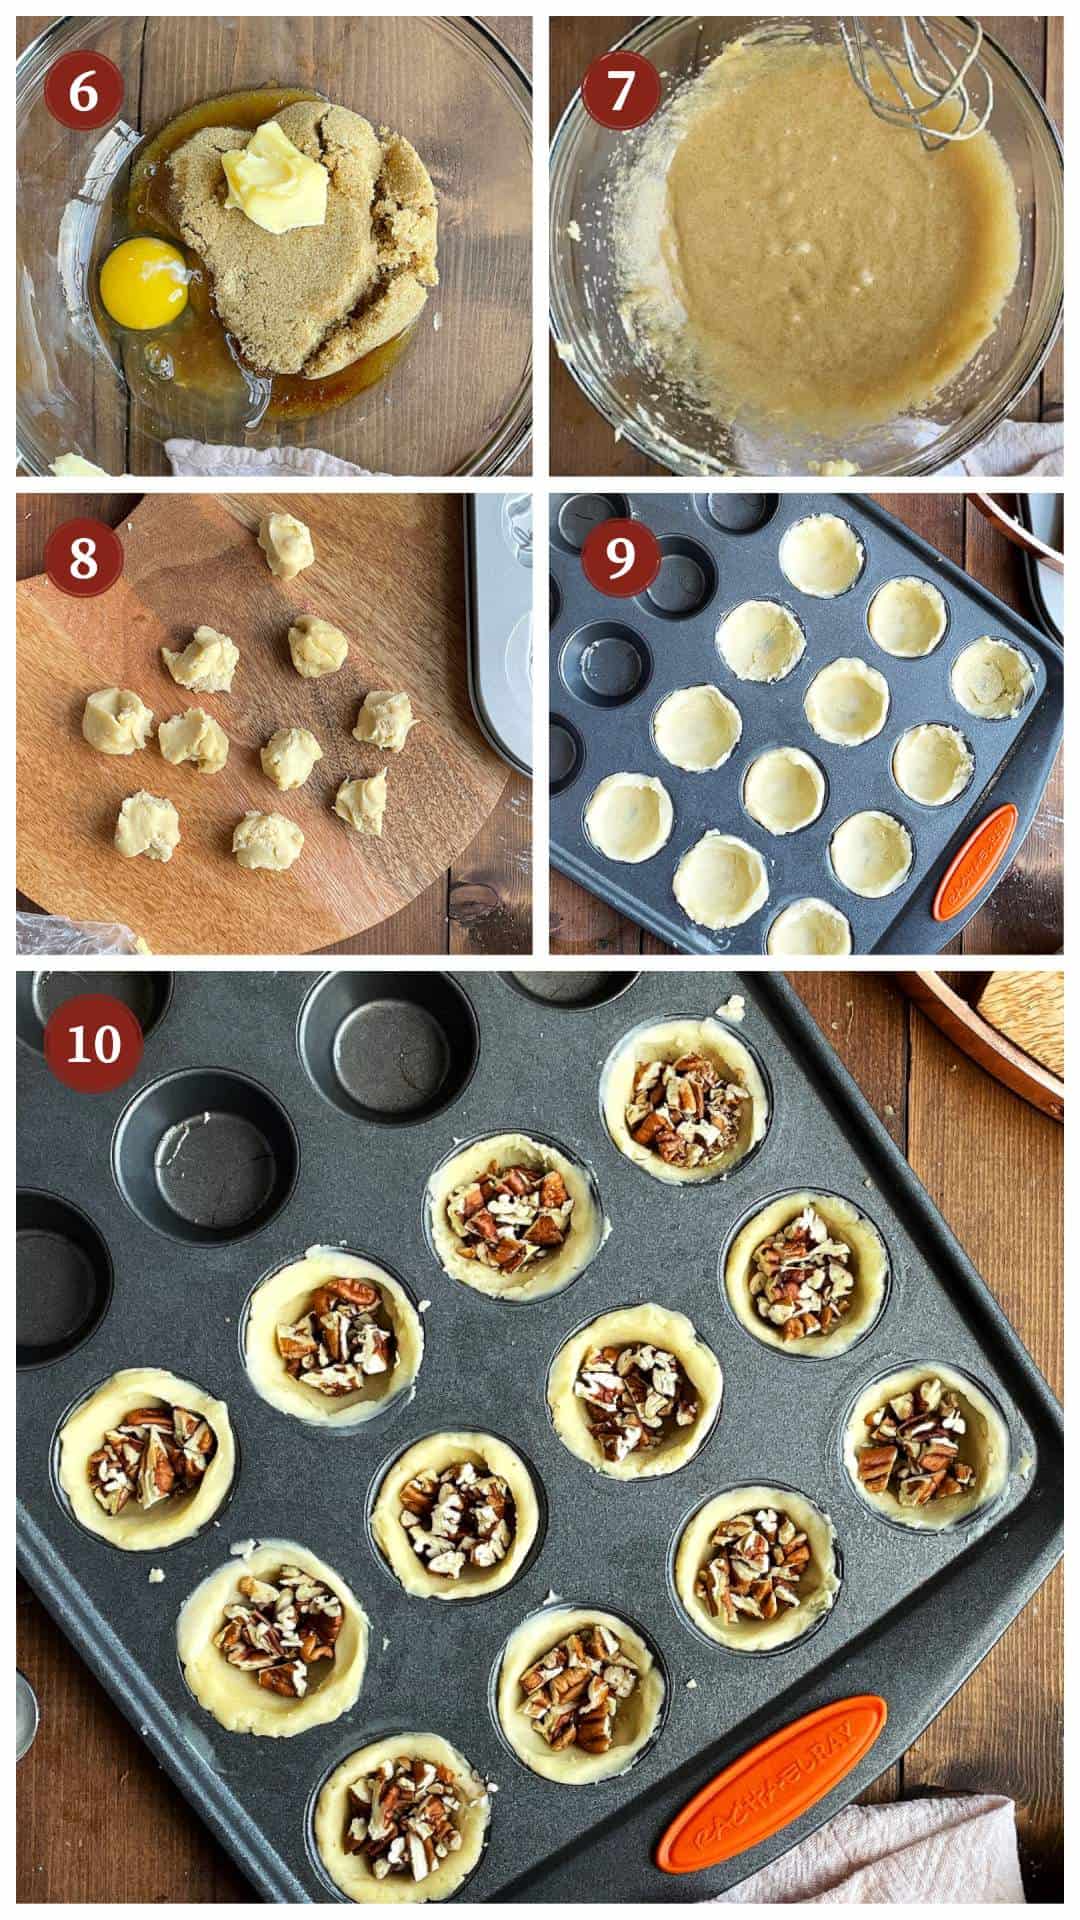 A collage of images showing how to make pecan tarts, steps 6 - 10.